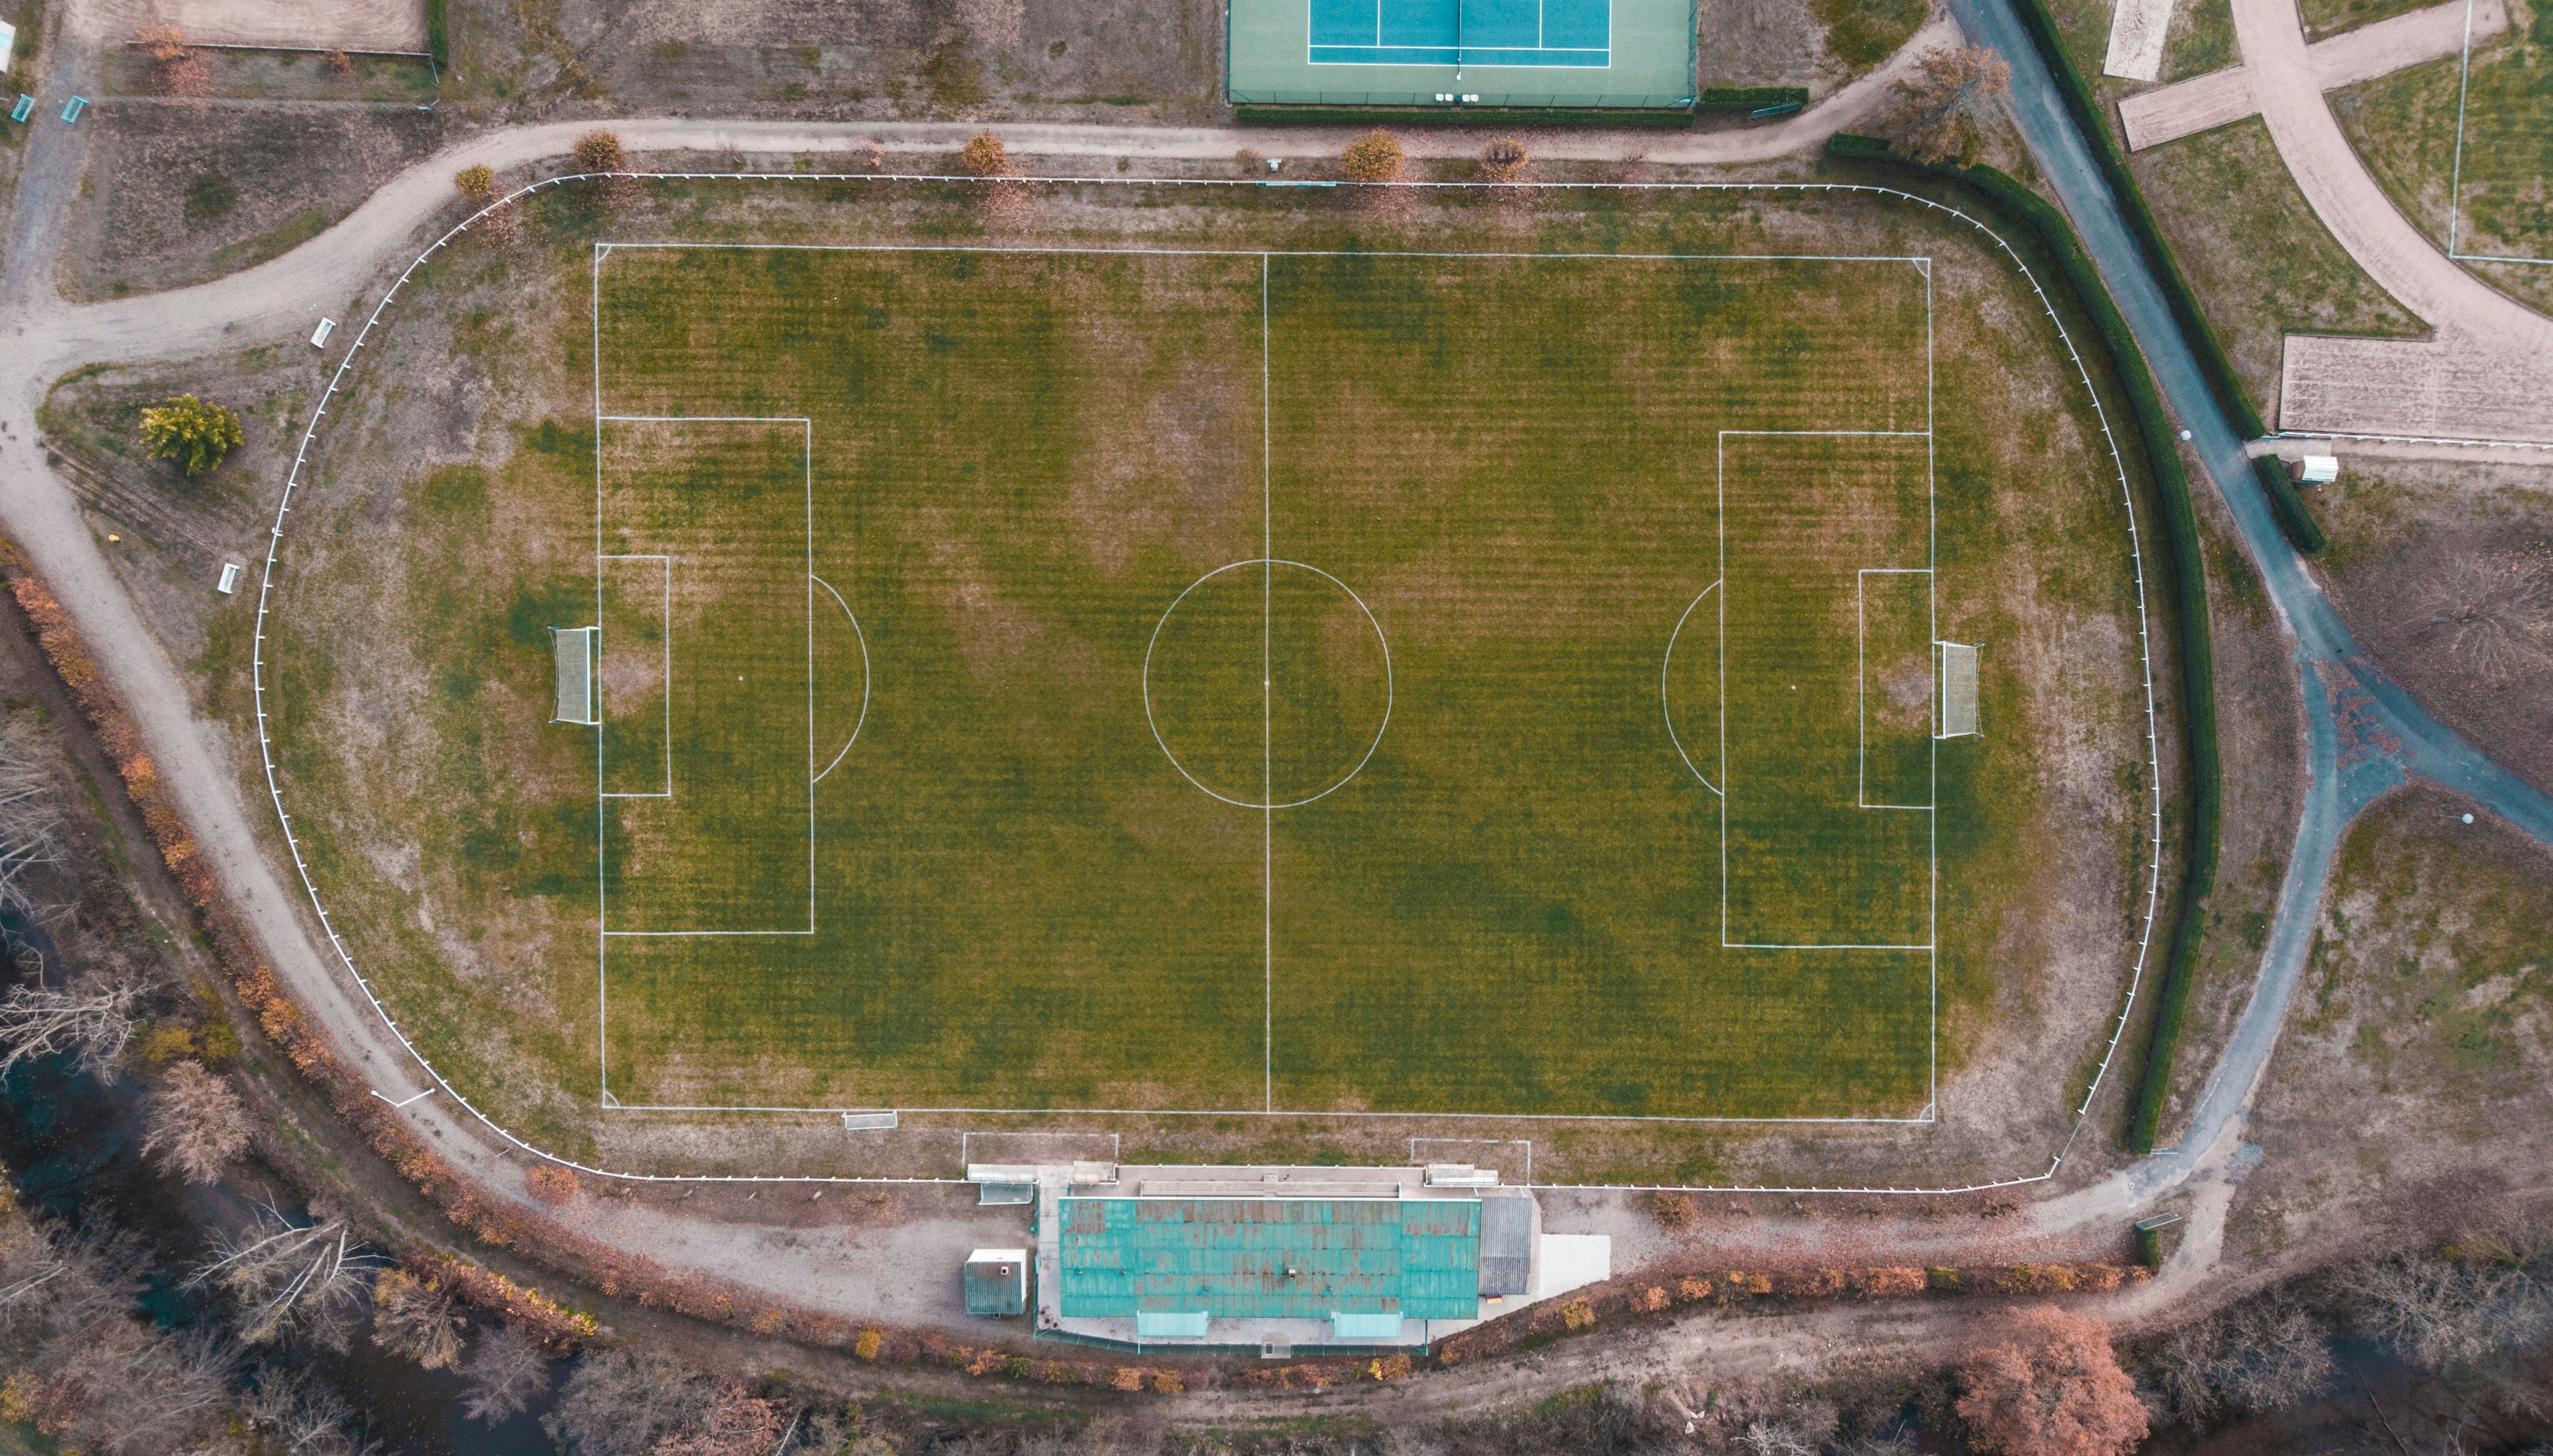 To practice using my drone, I went to a football stadium to minimize the risk of accidents in the trees. I climbed more than 180m to take this shot.